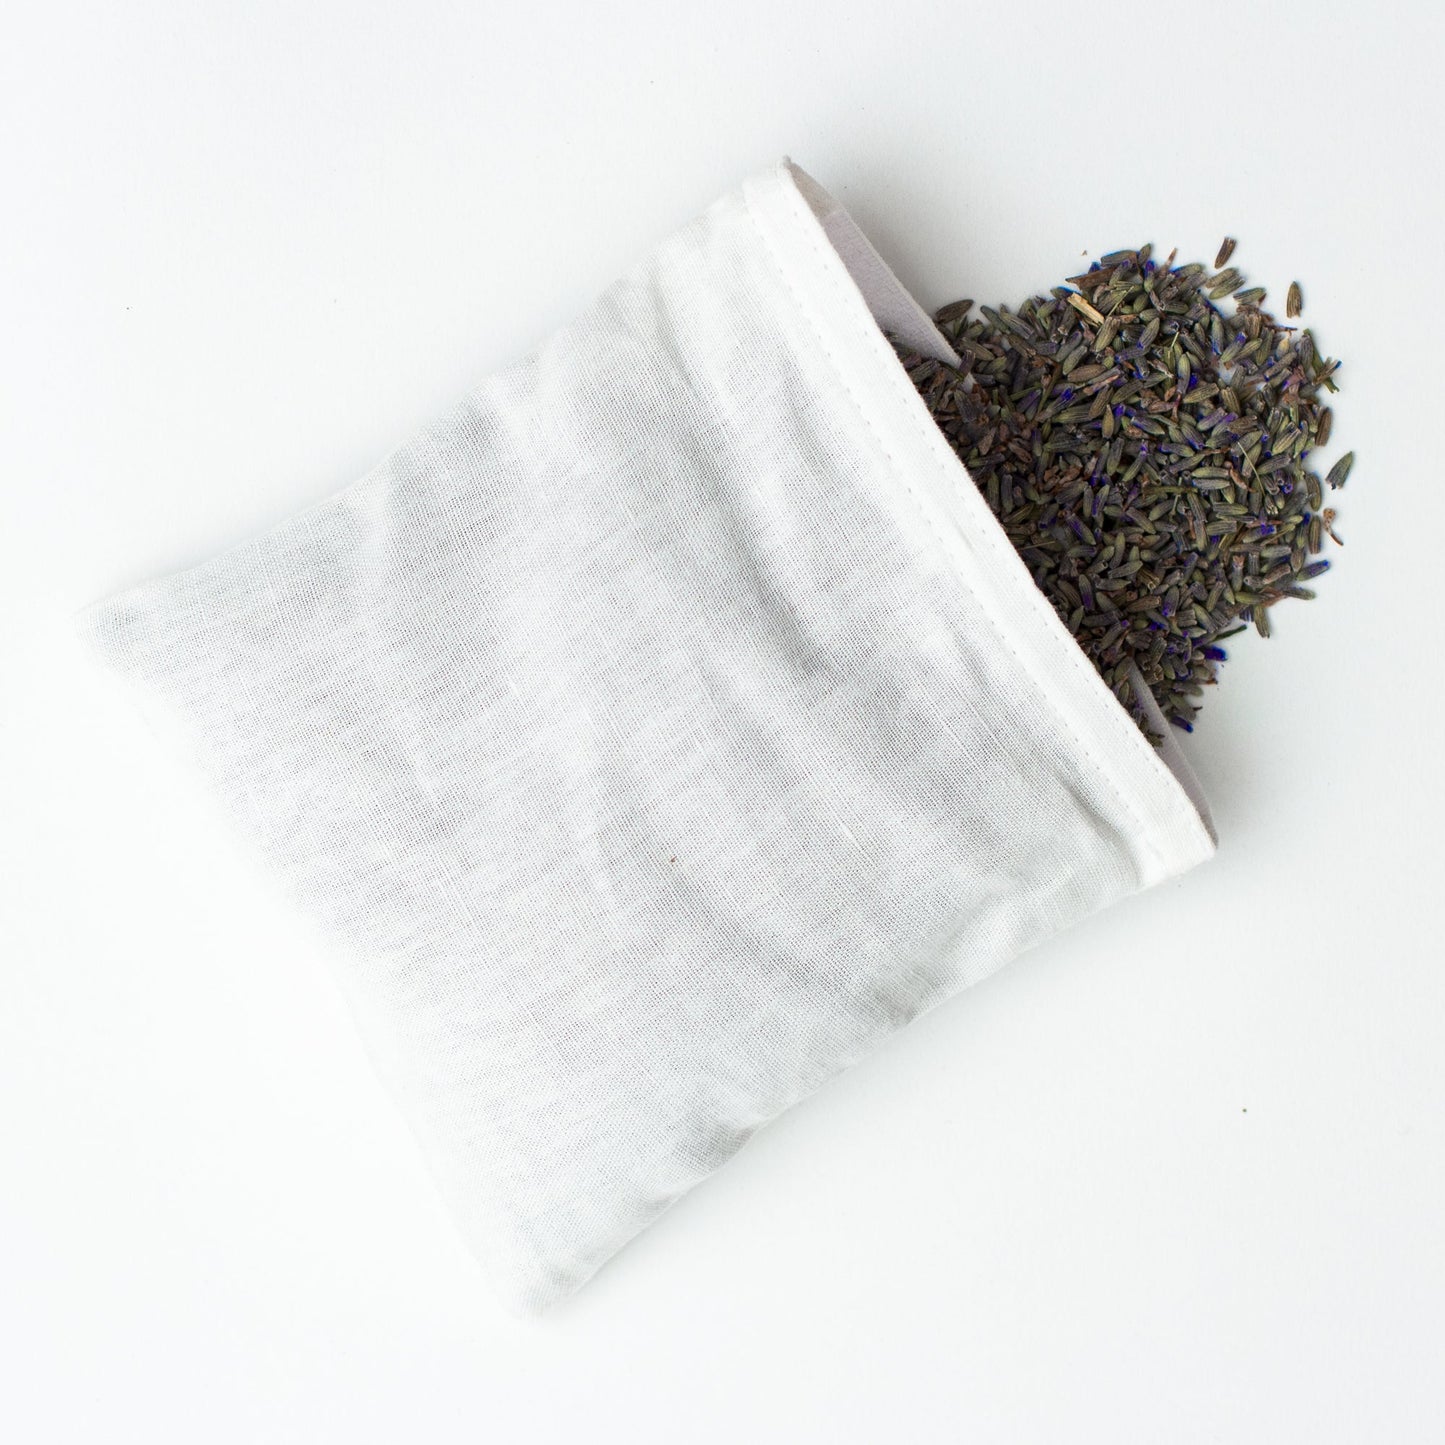 a white linen pouch filled with lavender, which is spilling out the open side of the pouch